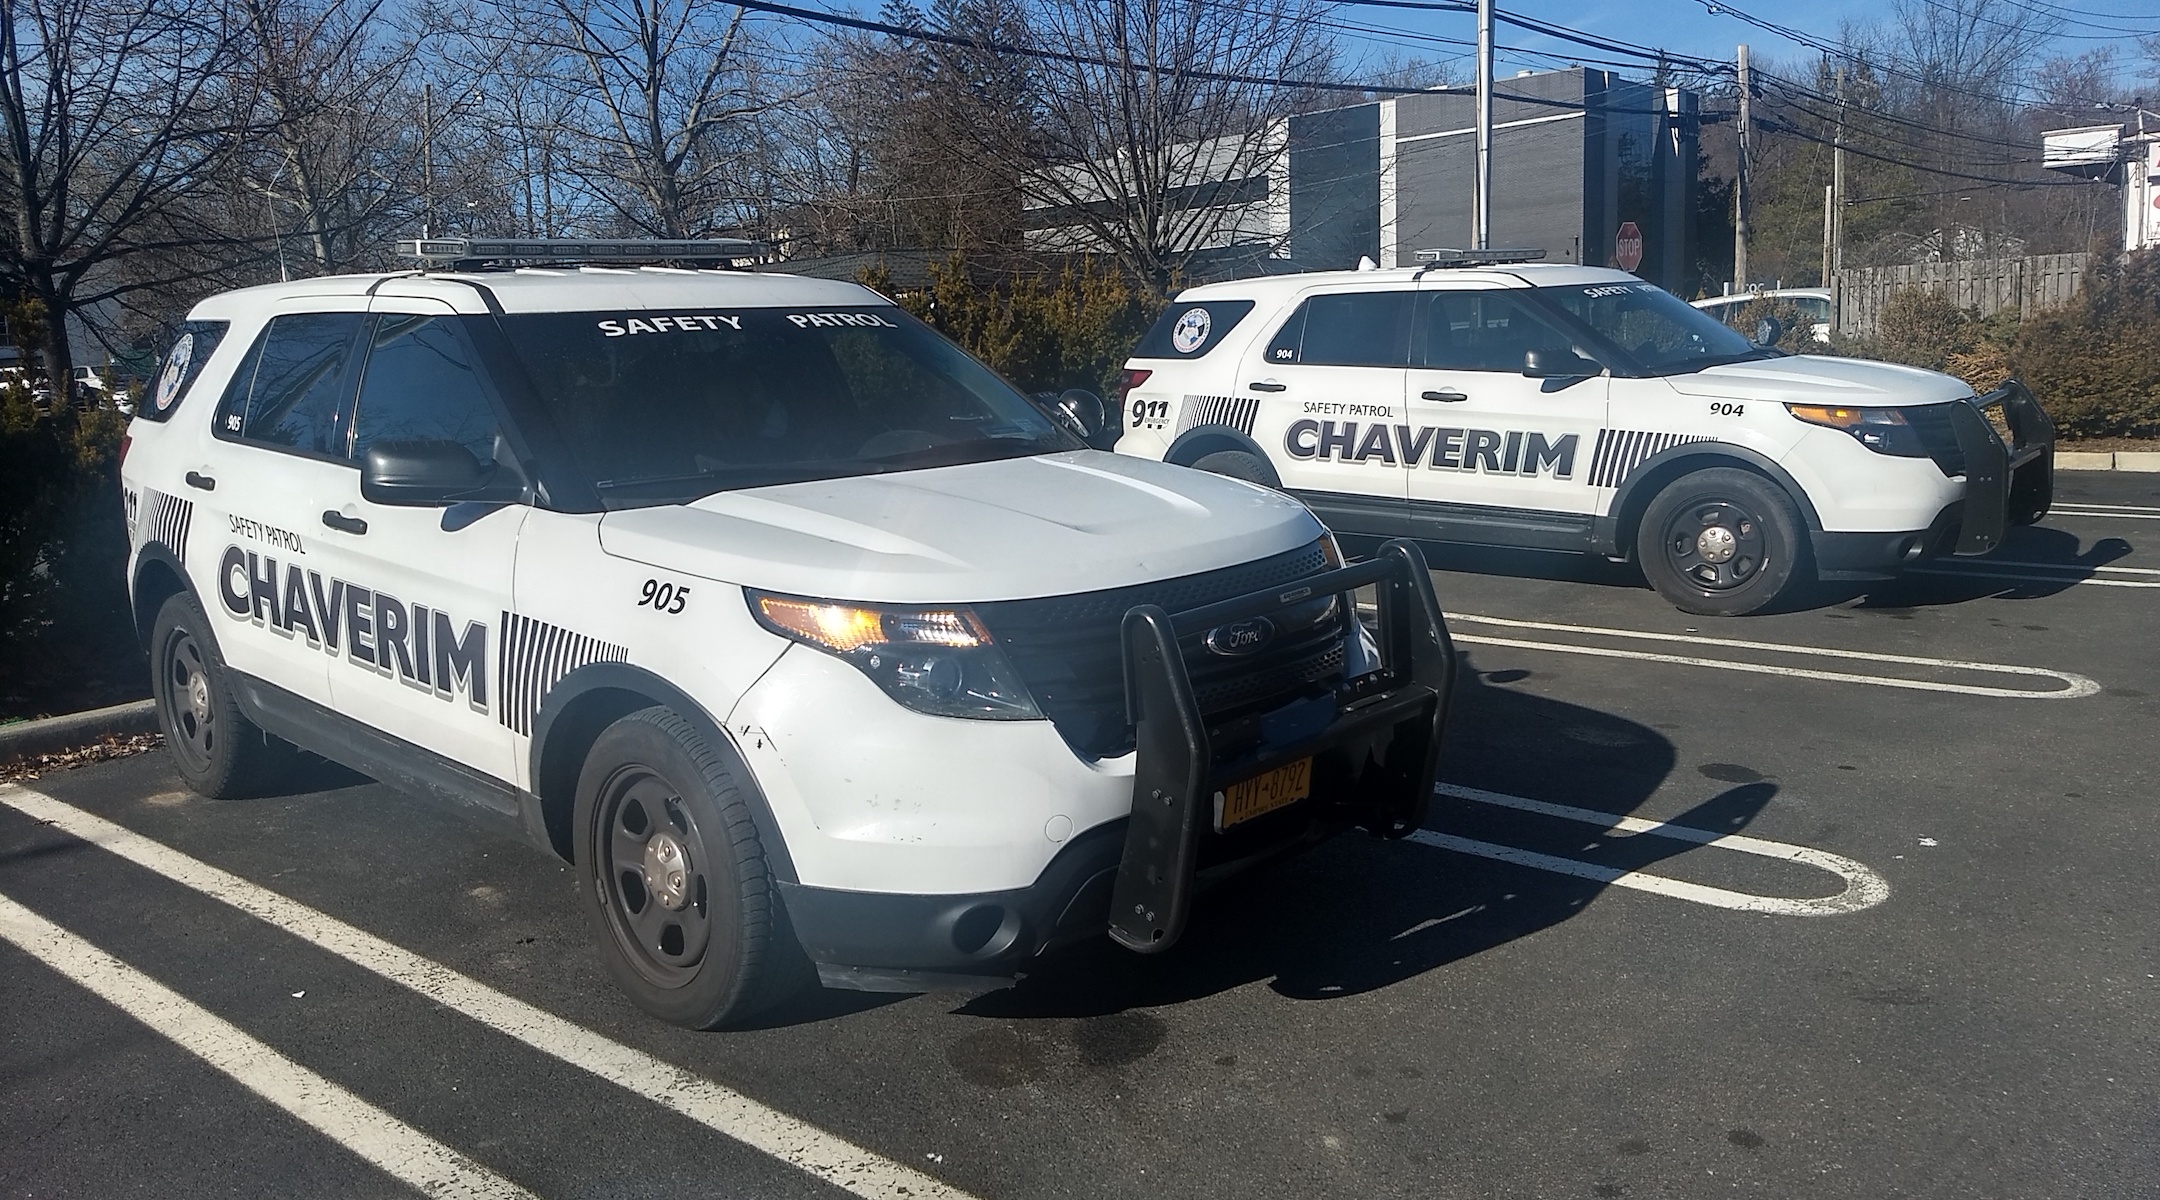 Two of Chaverim's SUVs, equipped with sirens and insignia. (Ben Sales)